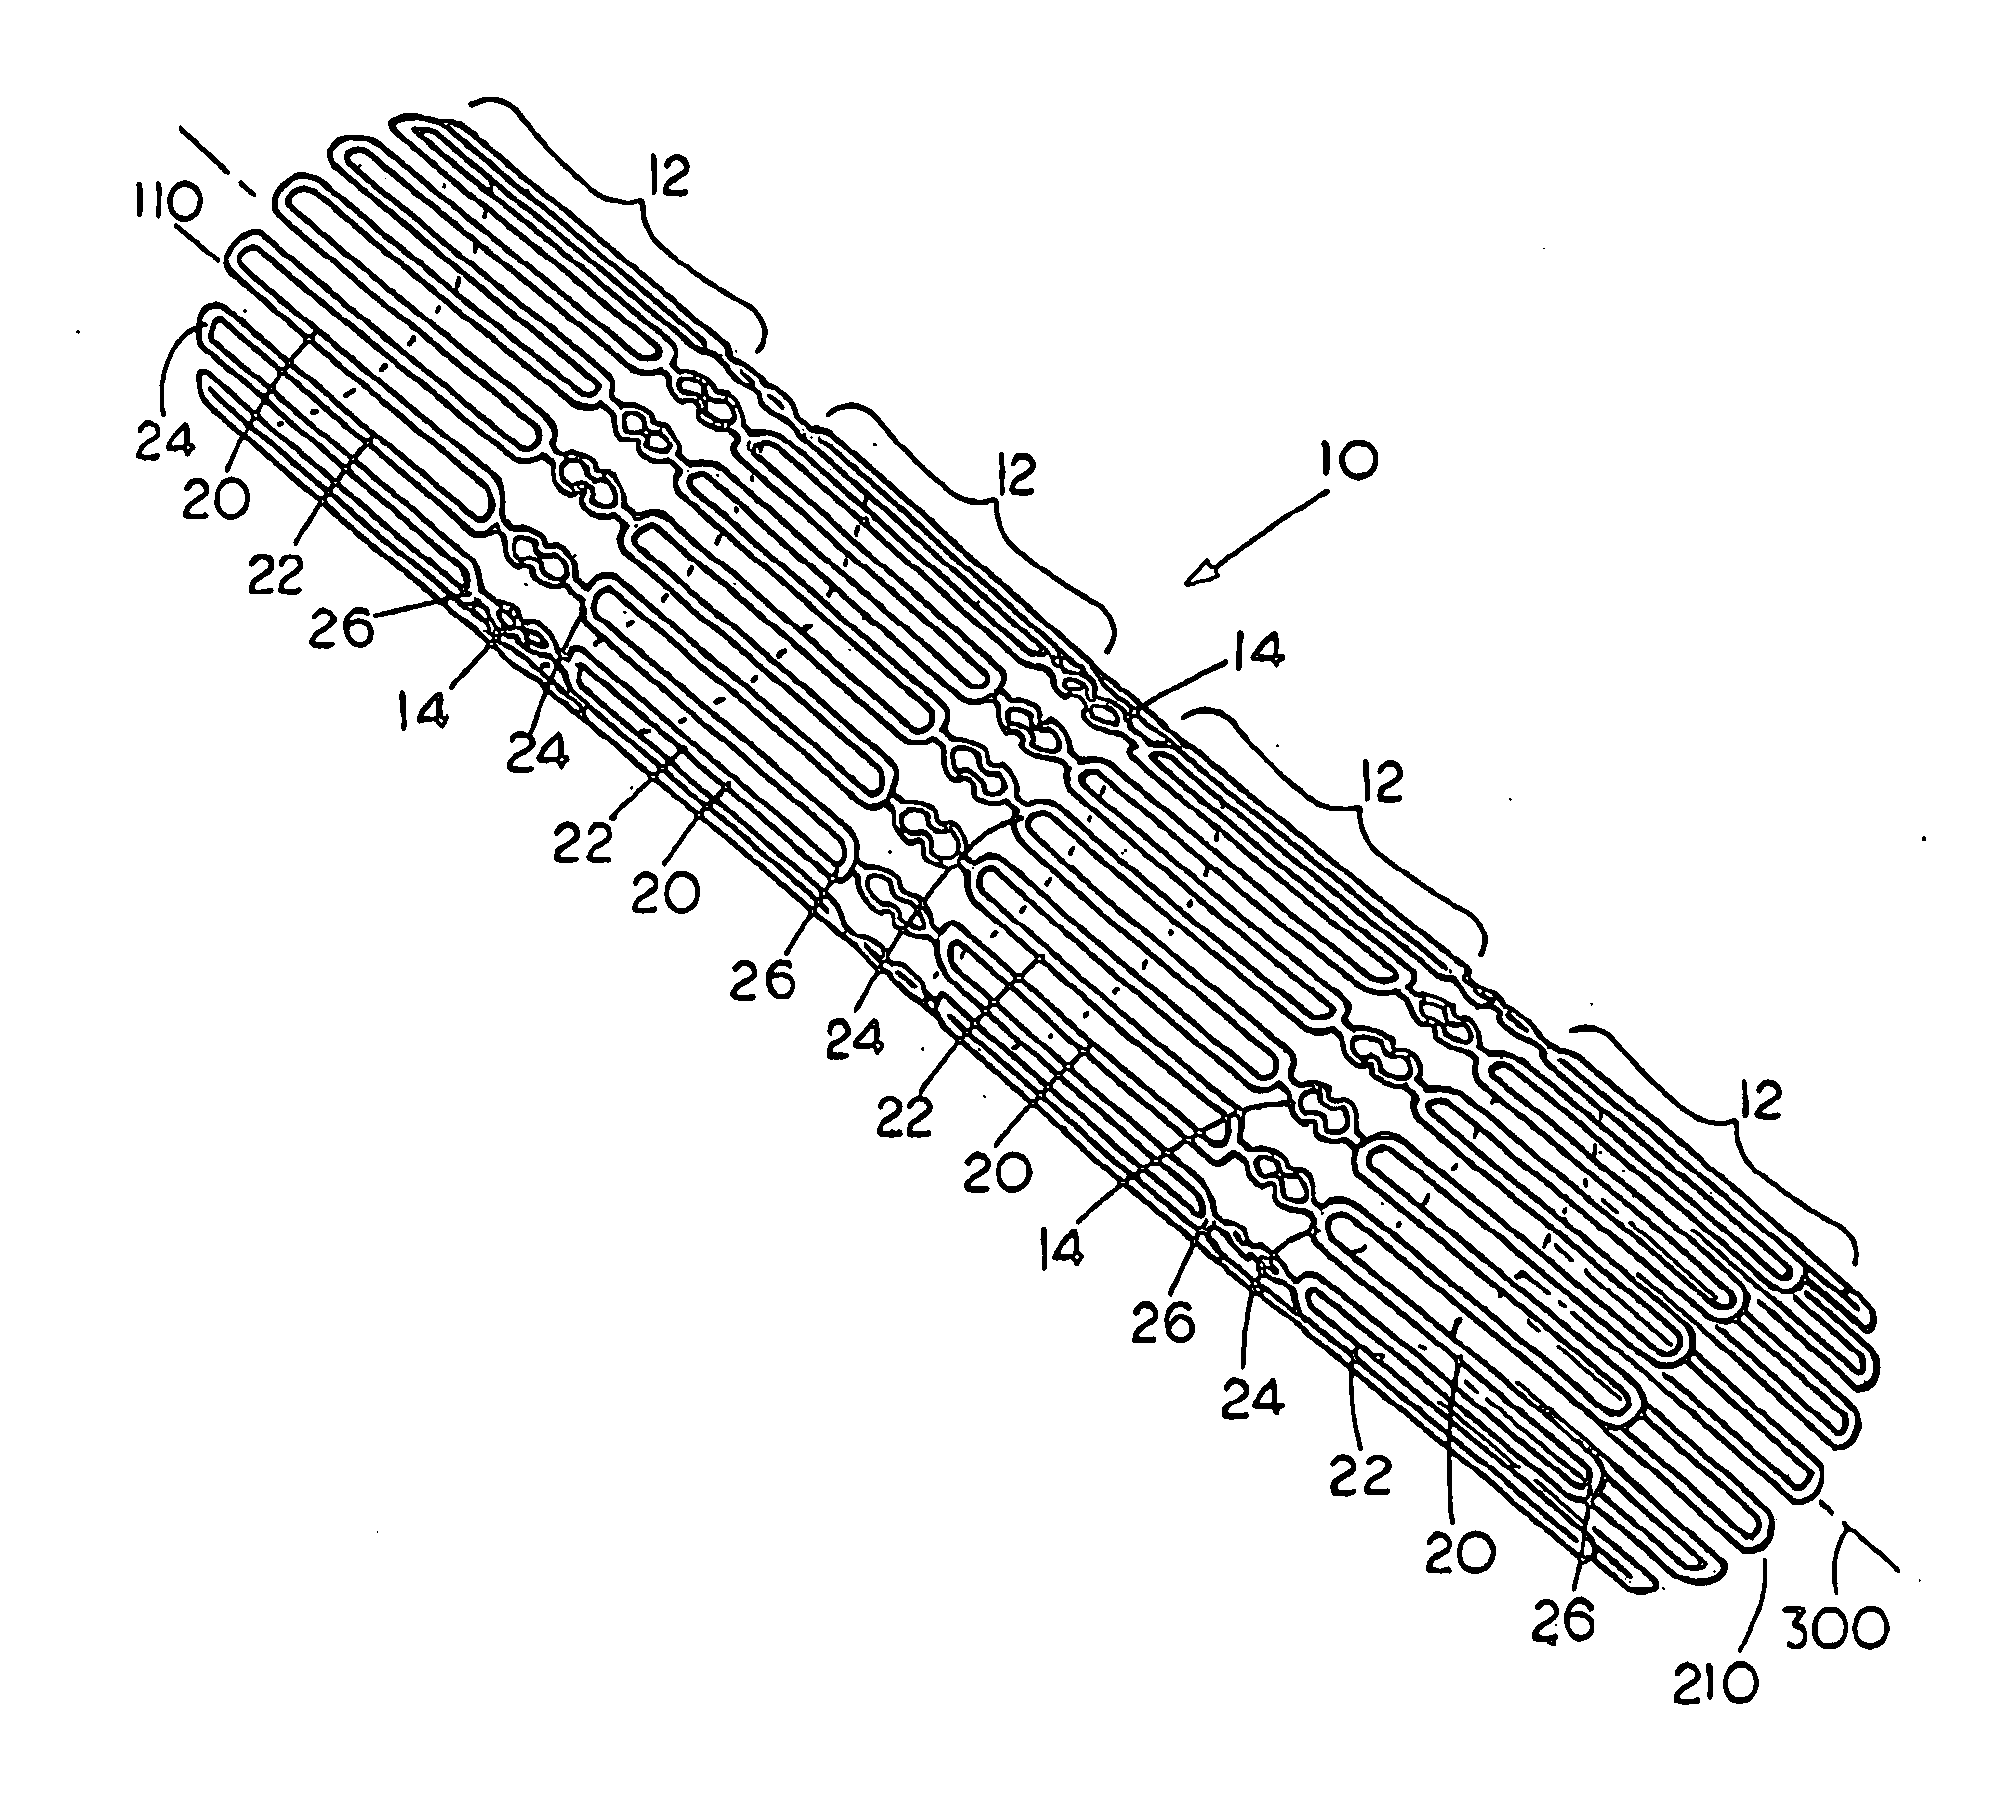 Flexible cells for axially interconnecting stent components